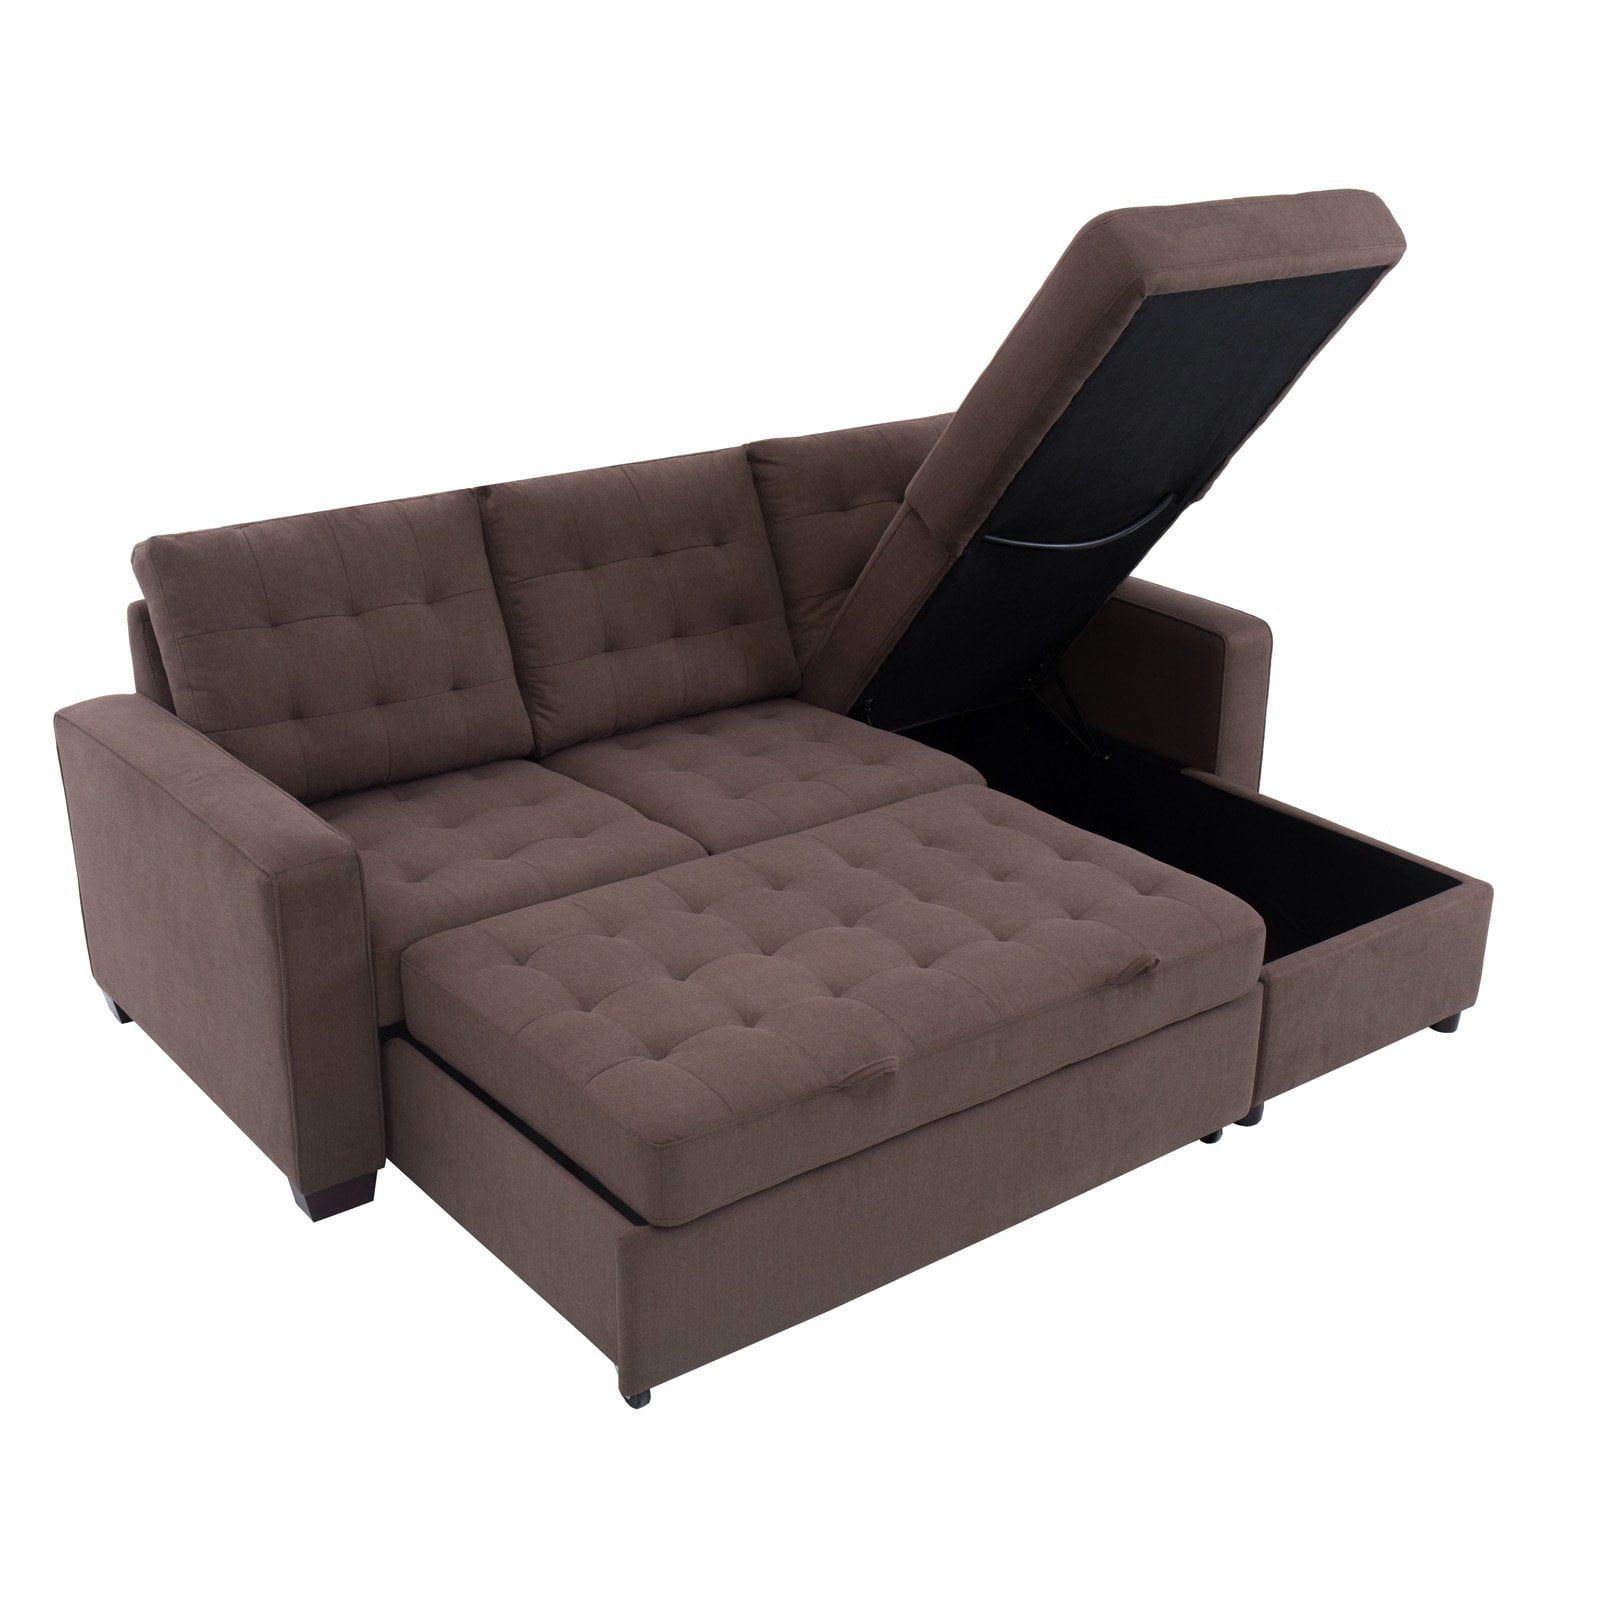 Bostal Serta Sofa Bed Convertible: Converts Into A Sofa, Chaise, Bed Pertaining To Queen Size Convertible Sofa Beds (Gallery 20 of 20)